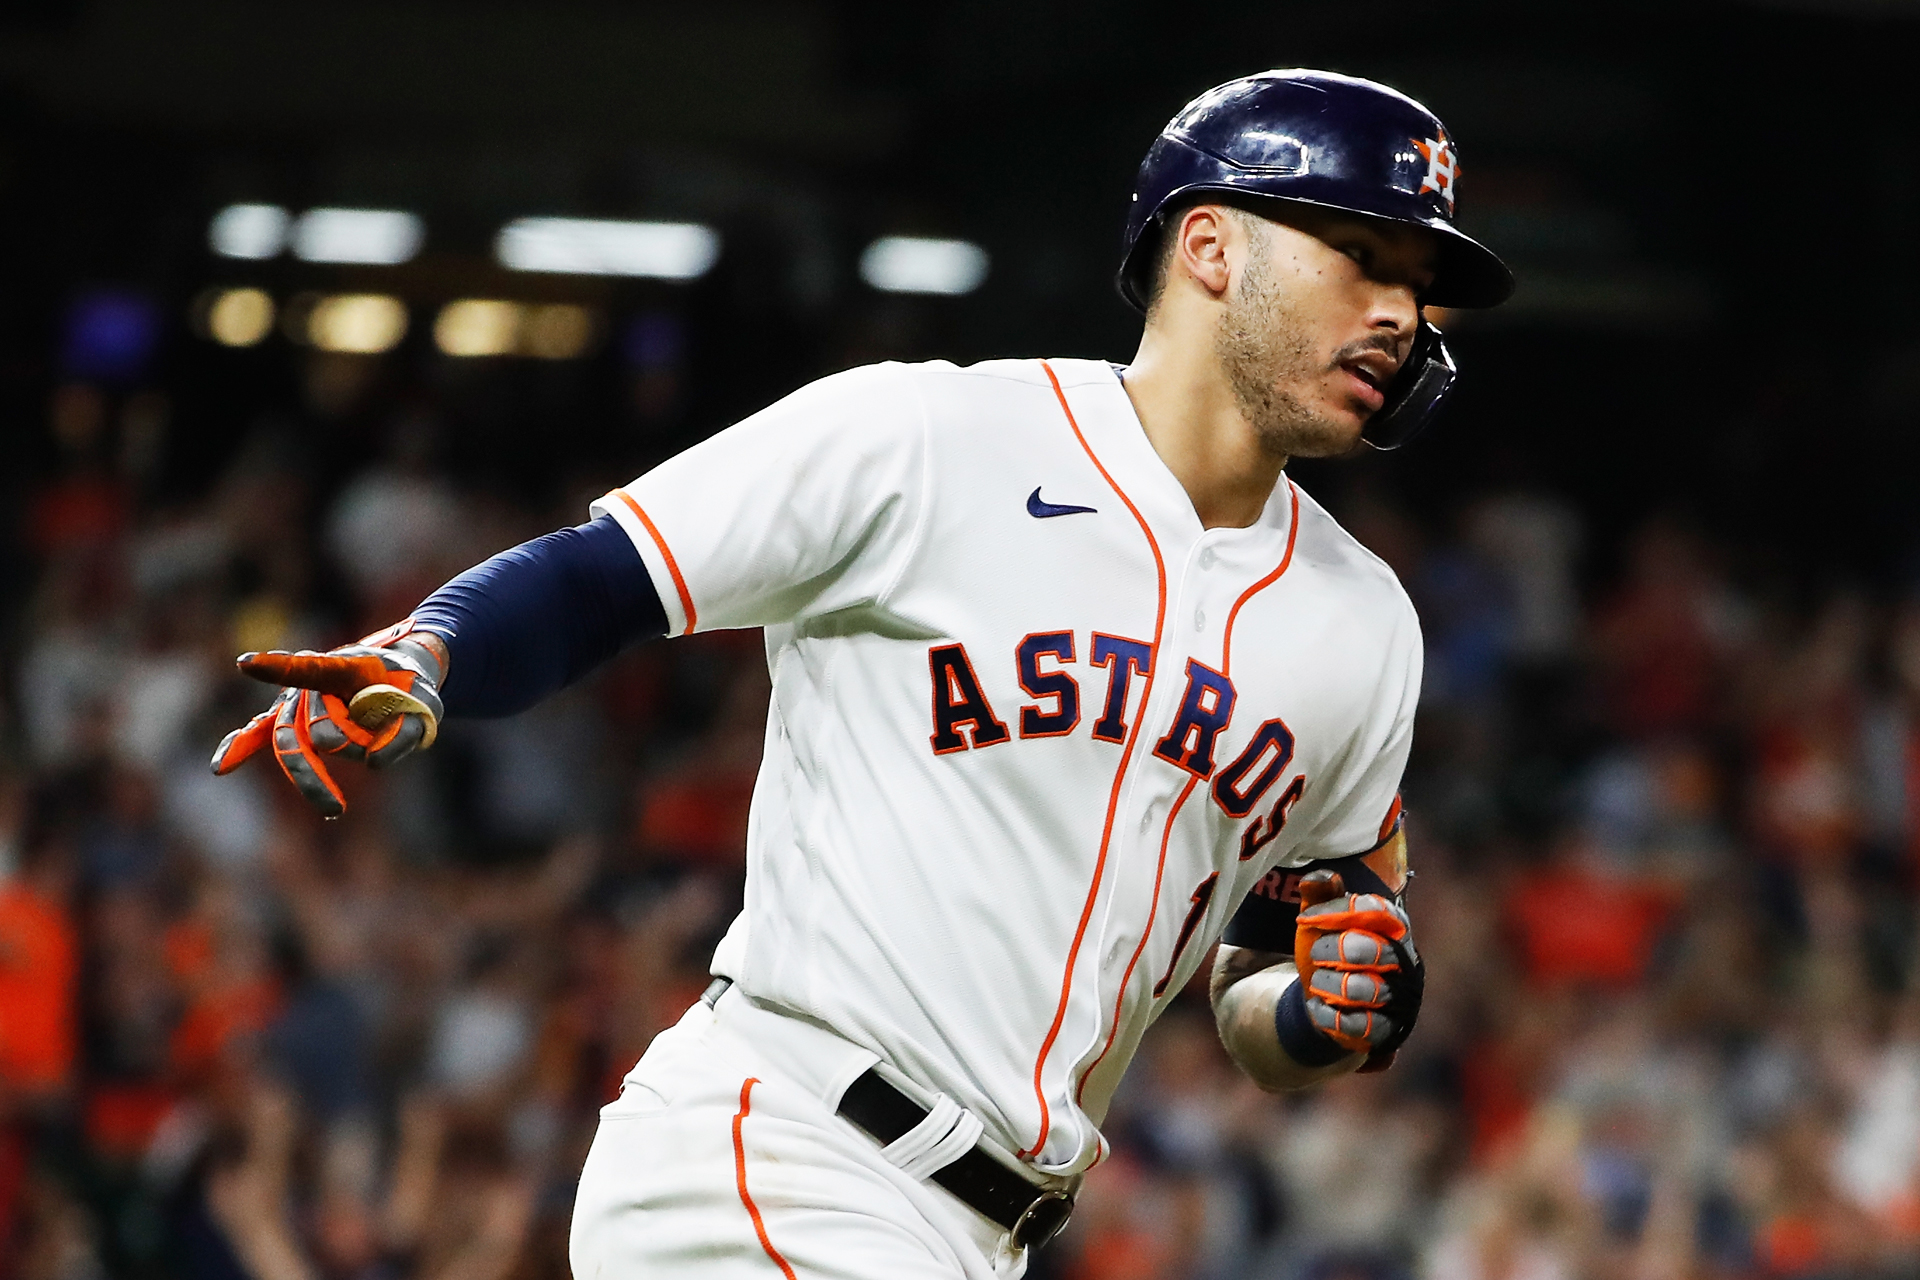 MLB on X: The @astros capture their 4th division title in 5 years